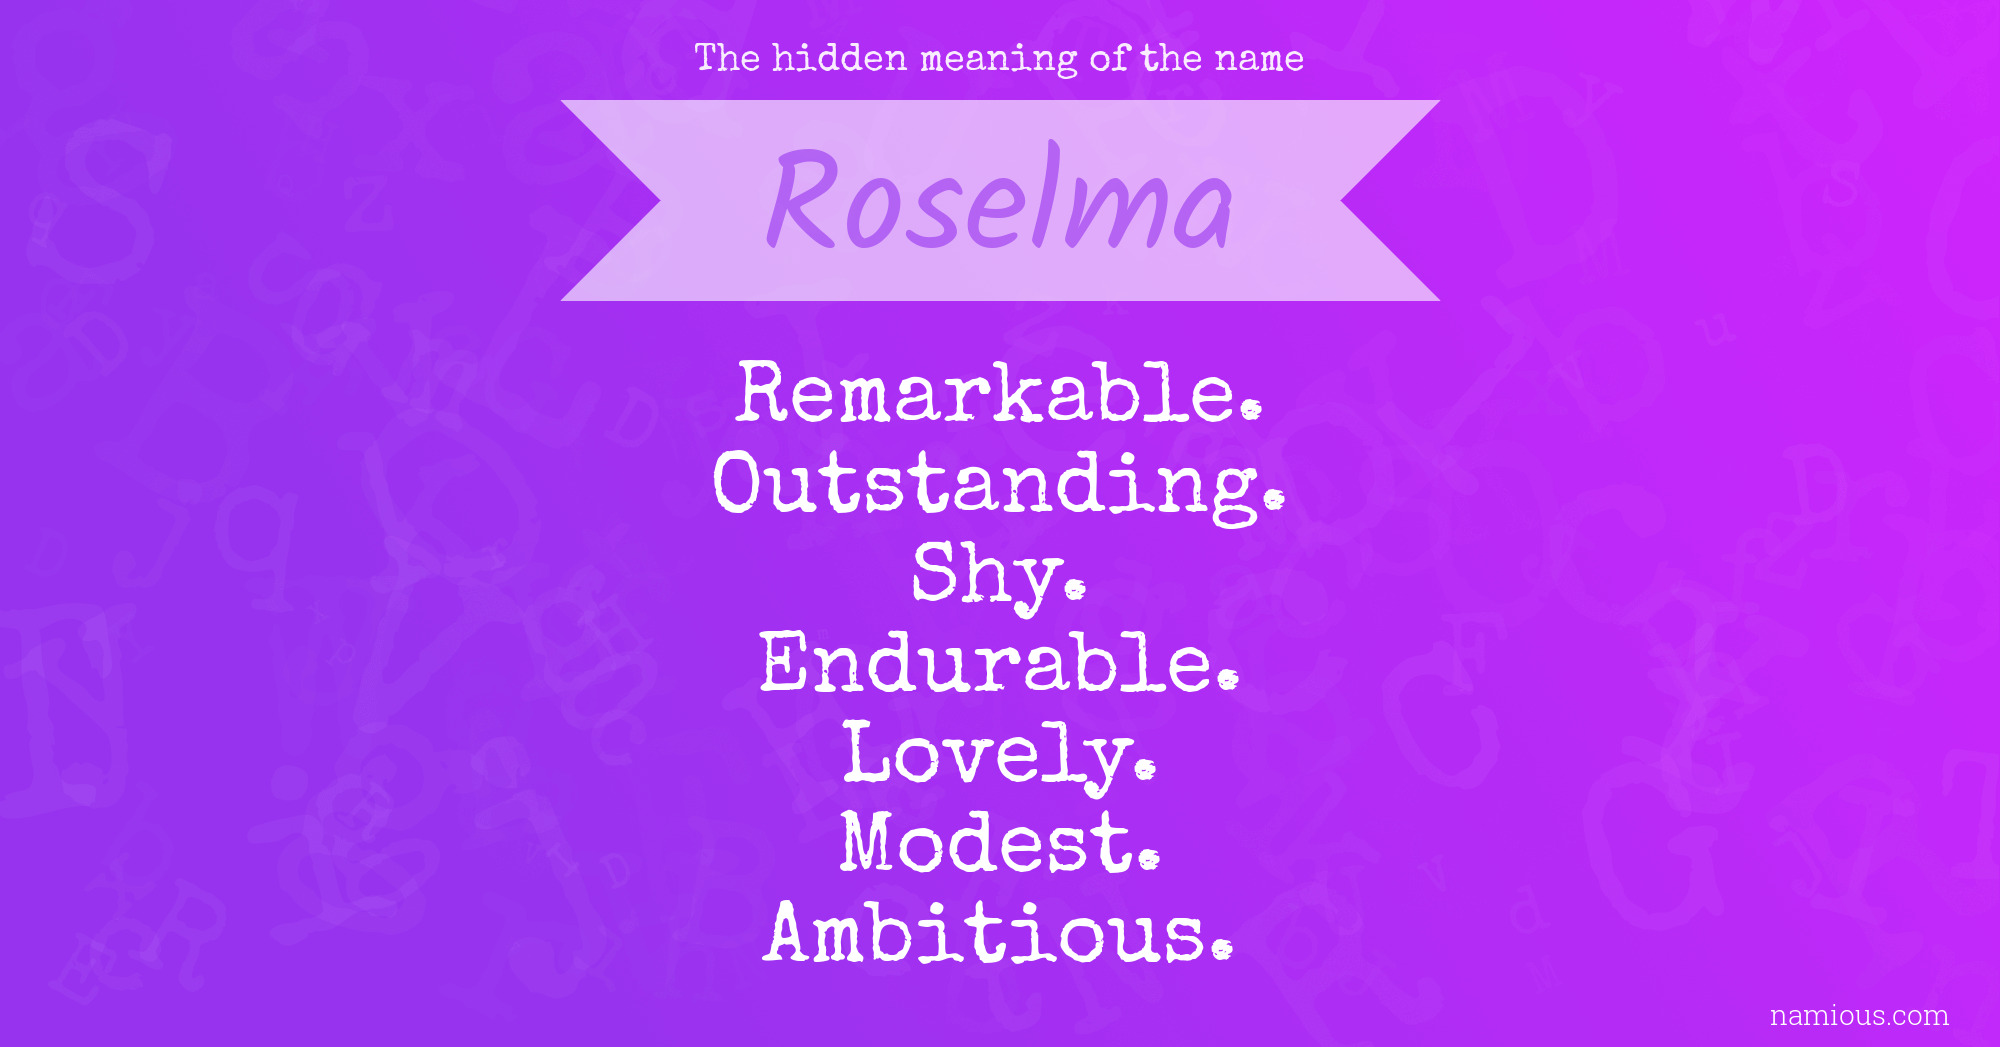 The hidden meaning of the name Roselma